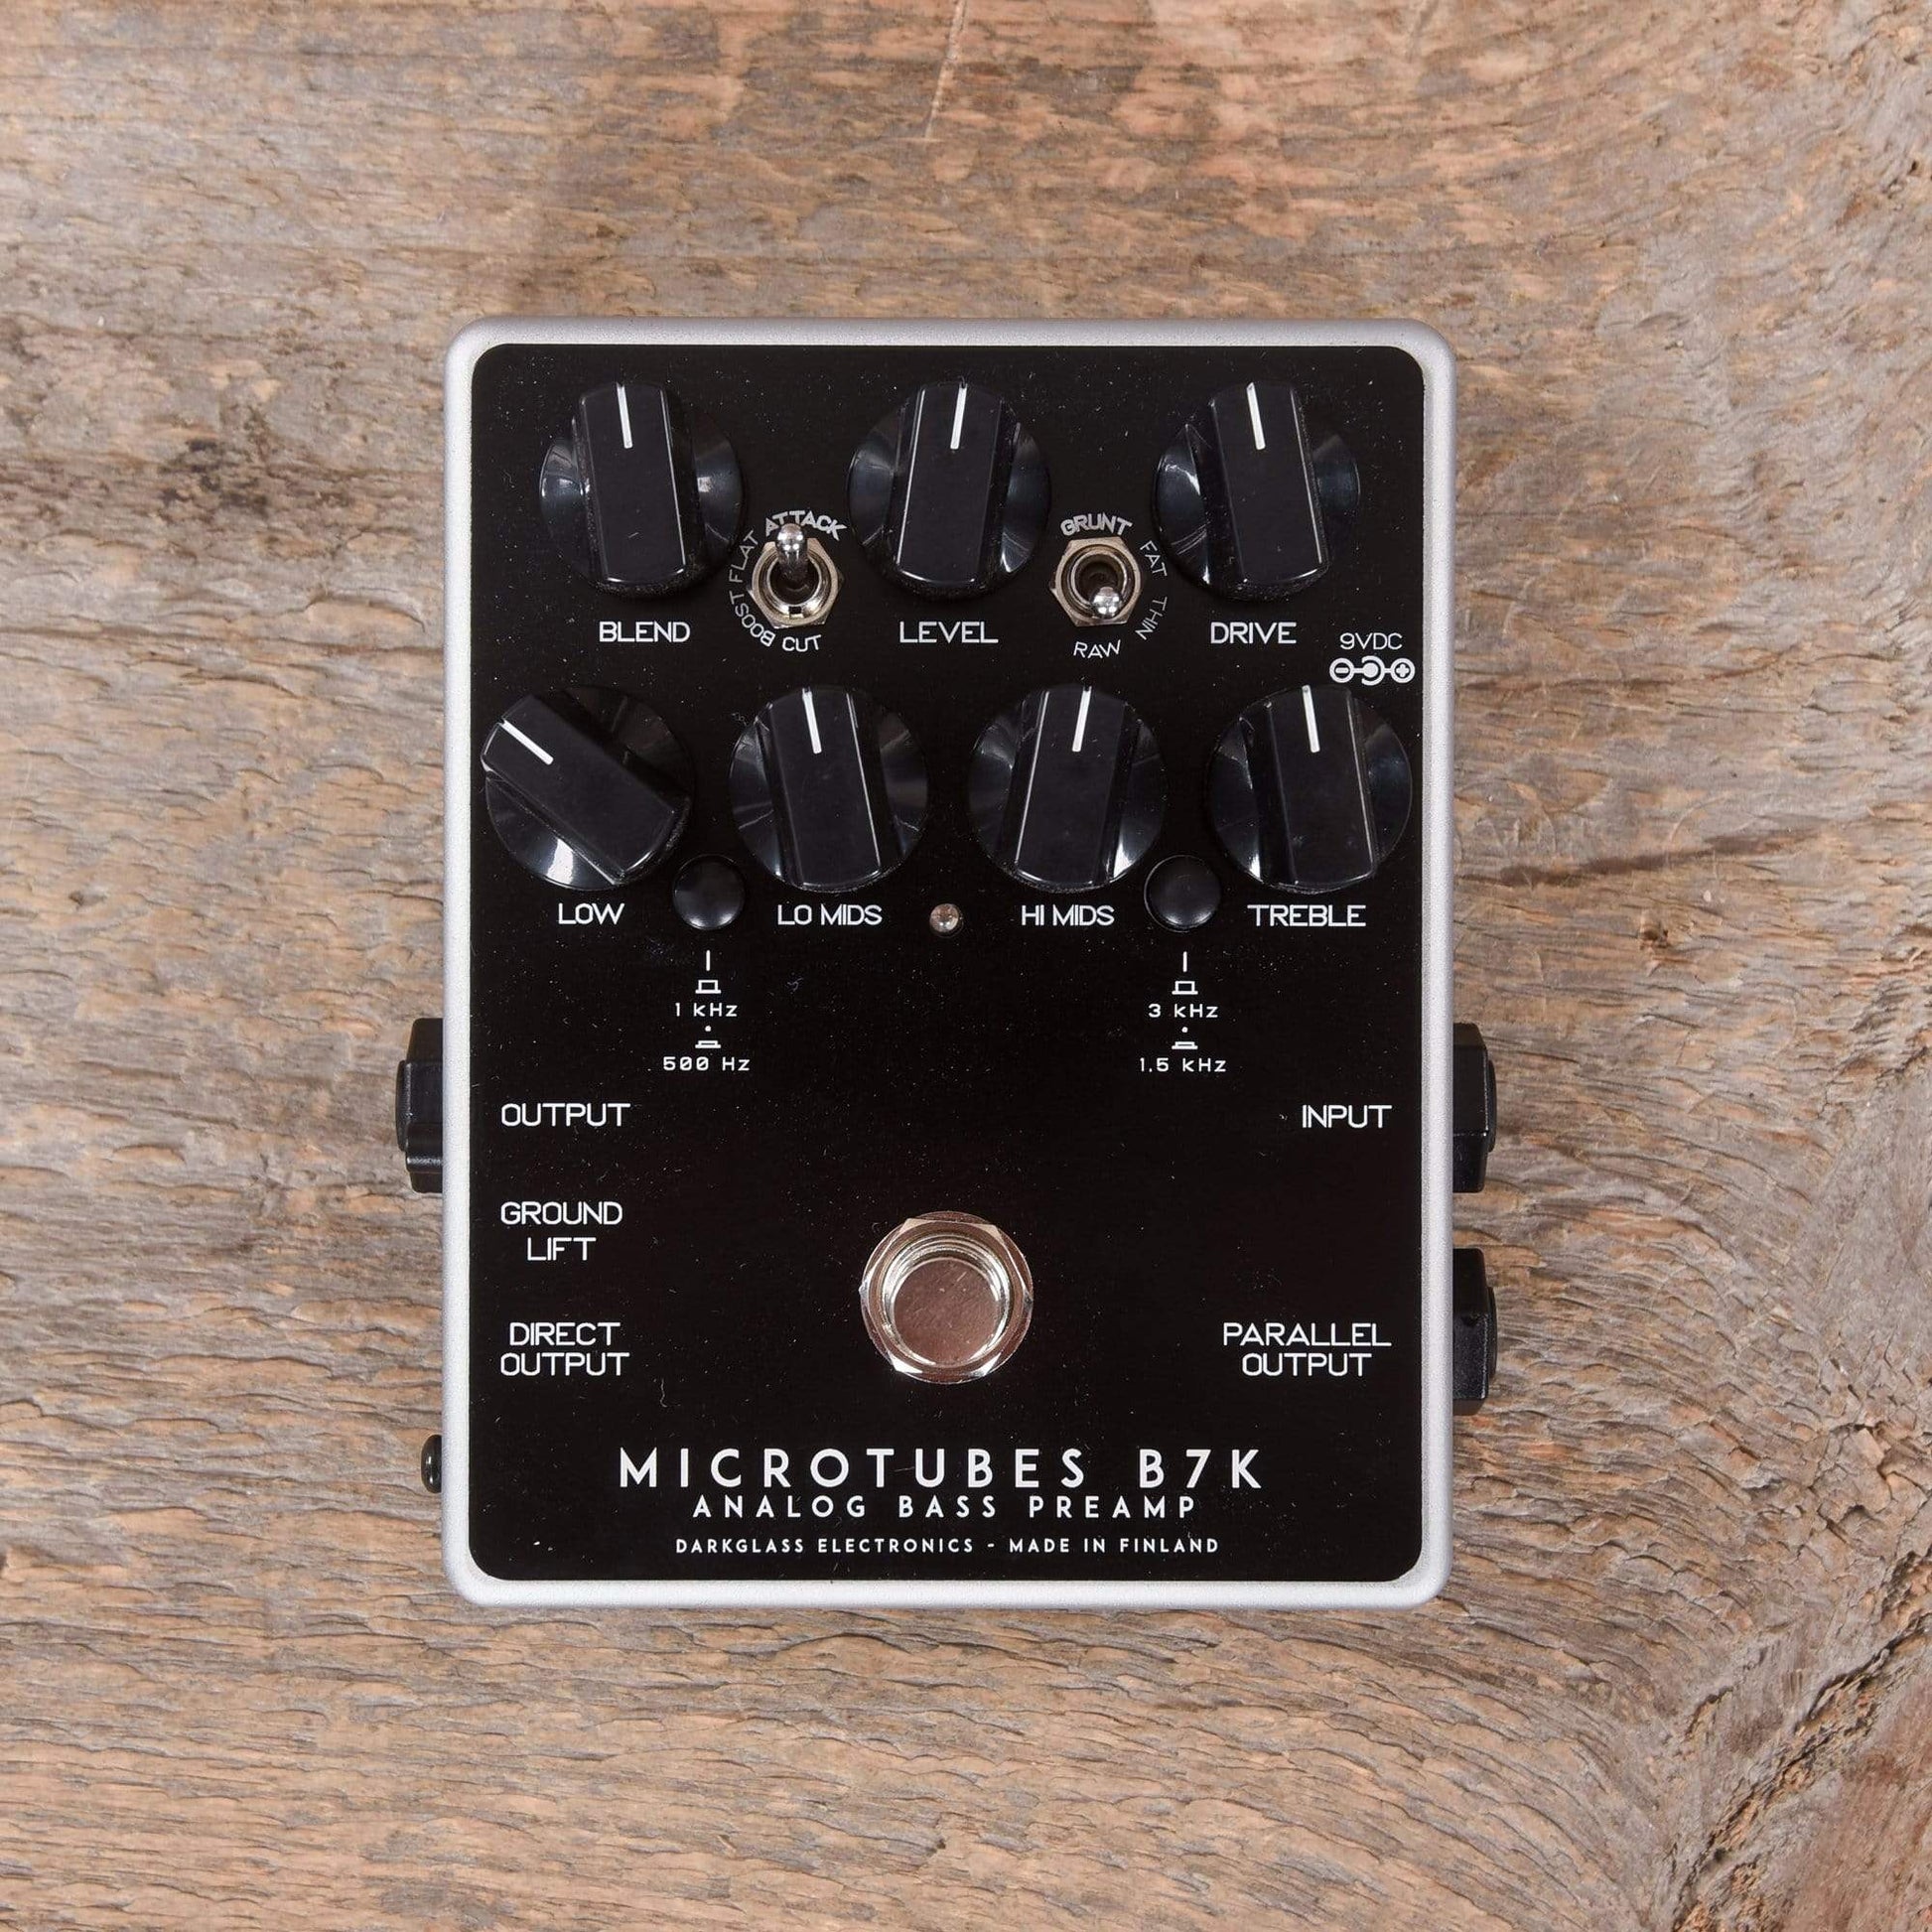 Darkglass Electronics Microtubes B7K Overdrive Preamp v2 Effects and Pedals / Overdrive and Boost